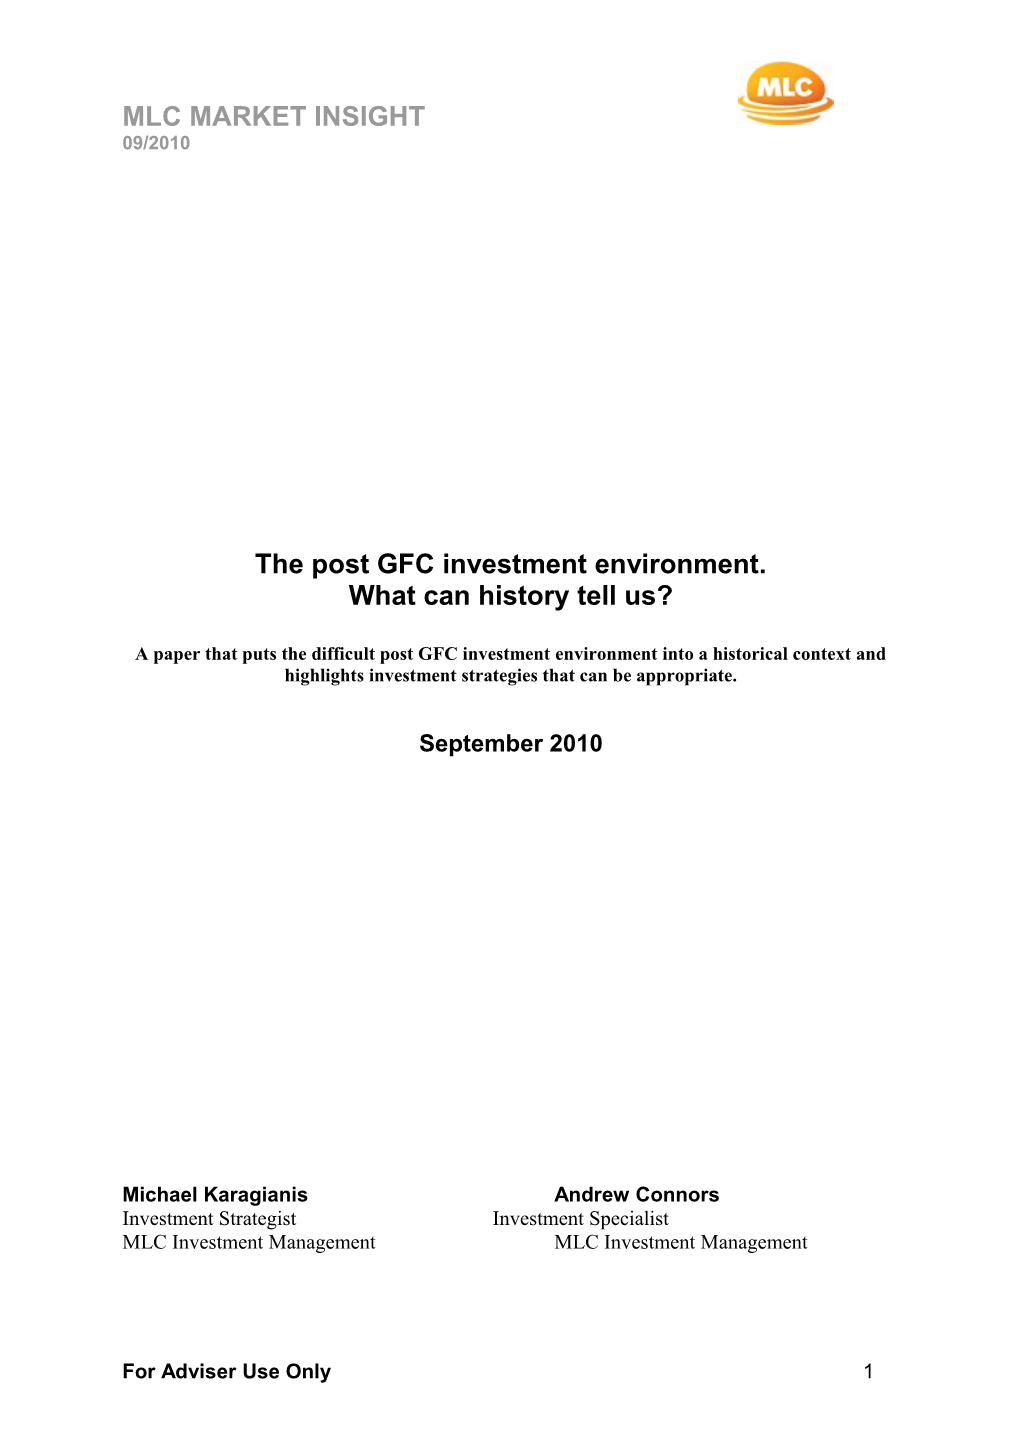 The Post GFC Investment Environment